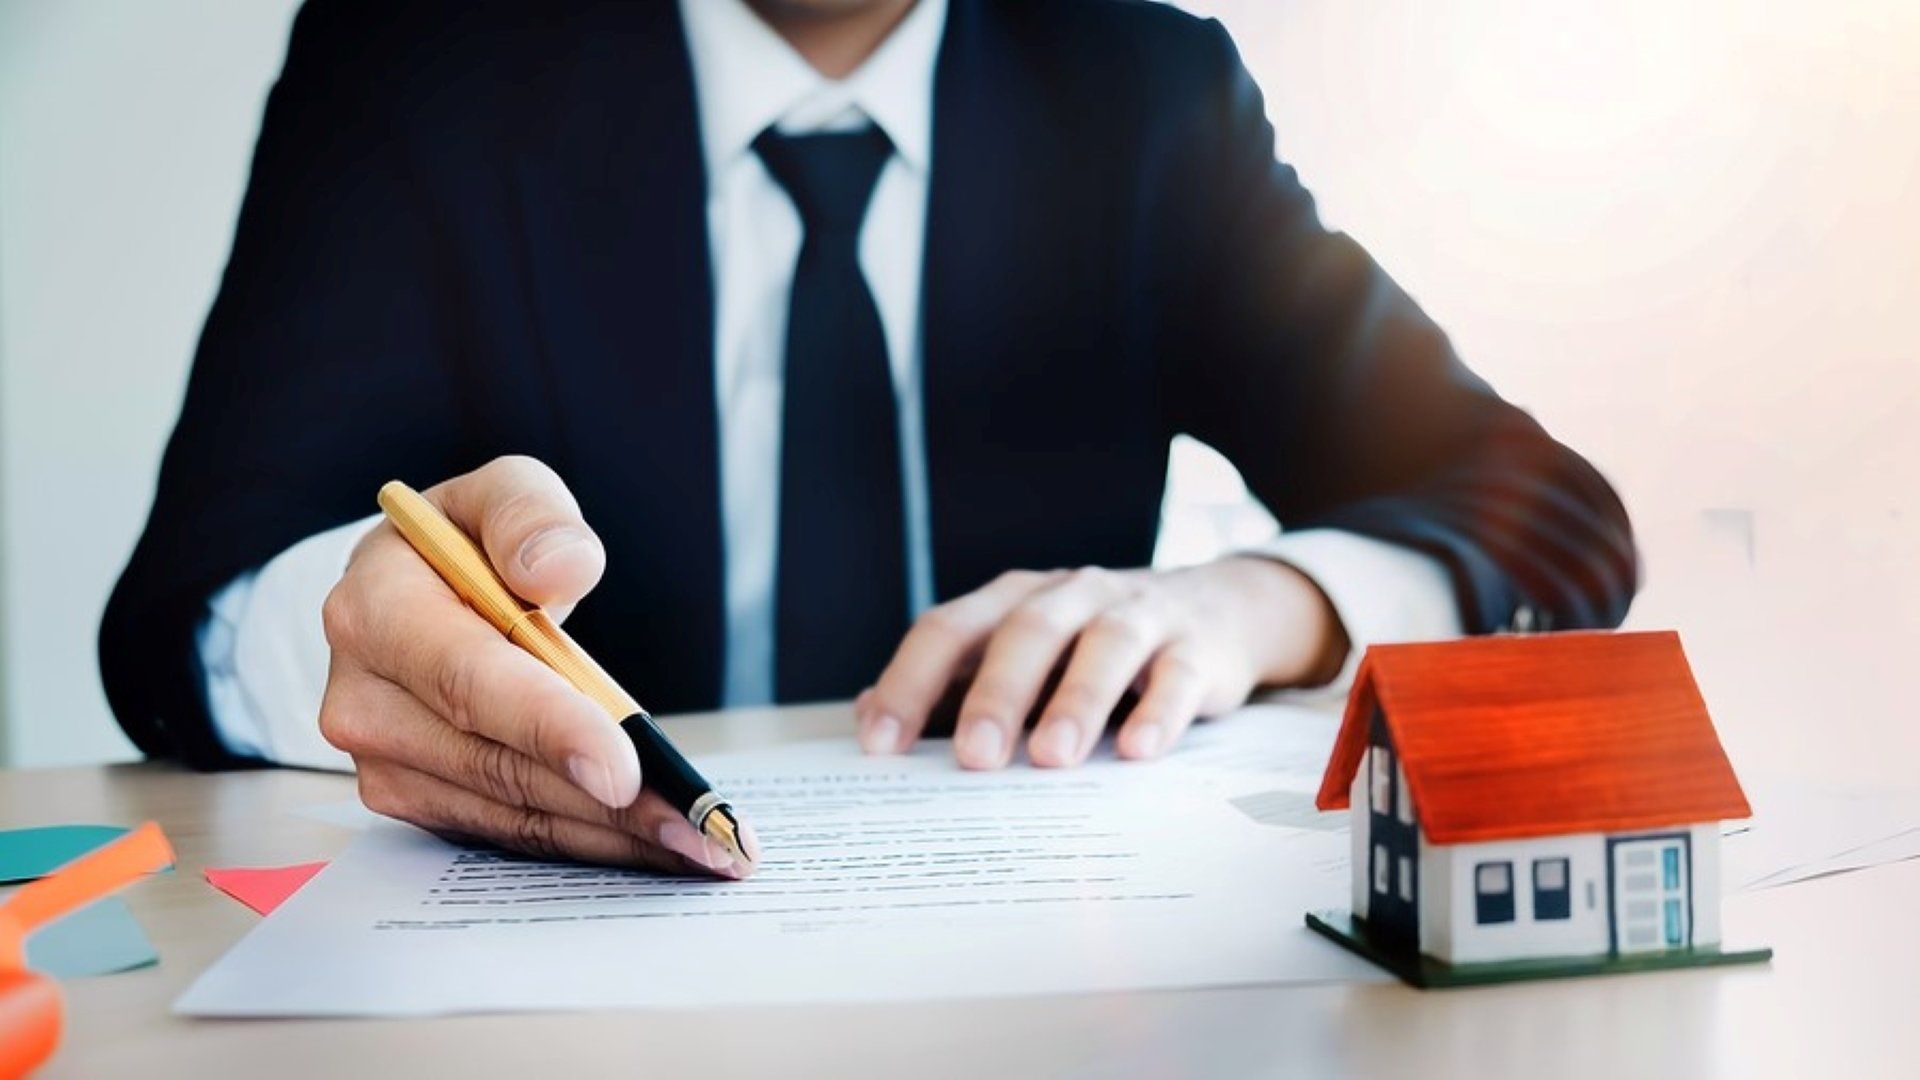 Why to hire a real estate agency?